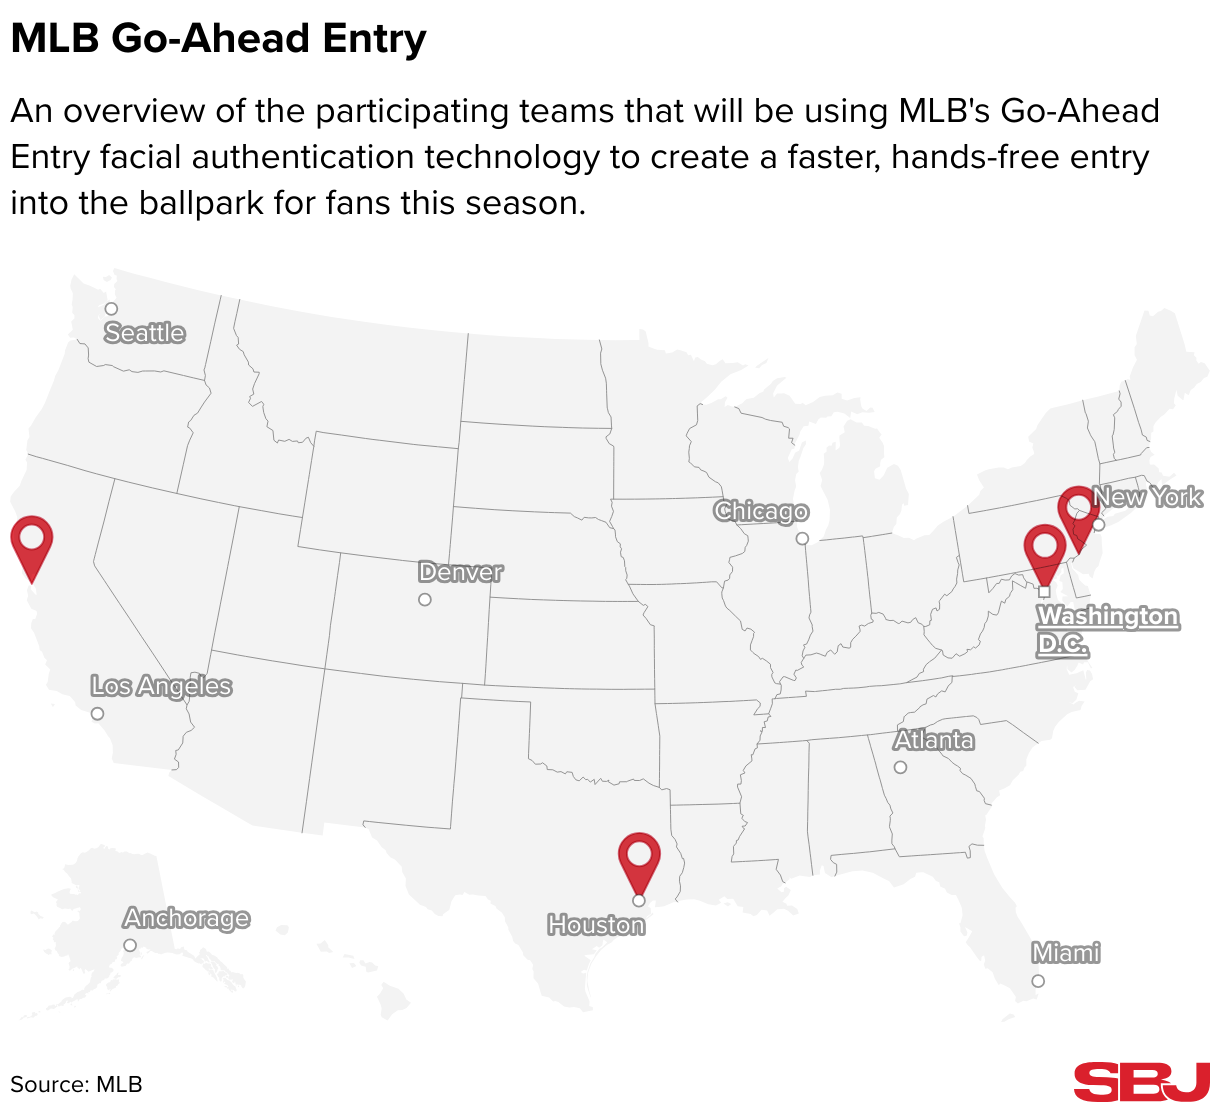 A map of the USA, including Alaska and Hawaii in the lower-left, containing locations of MLB ballparks using Go-Ahead Entry.